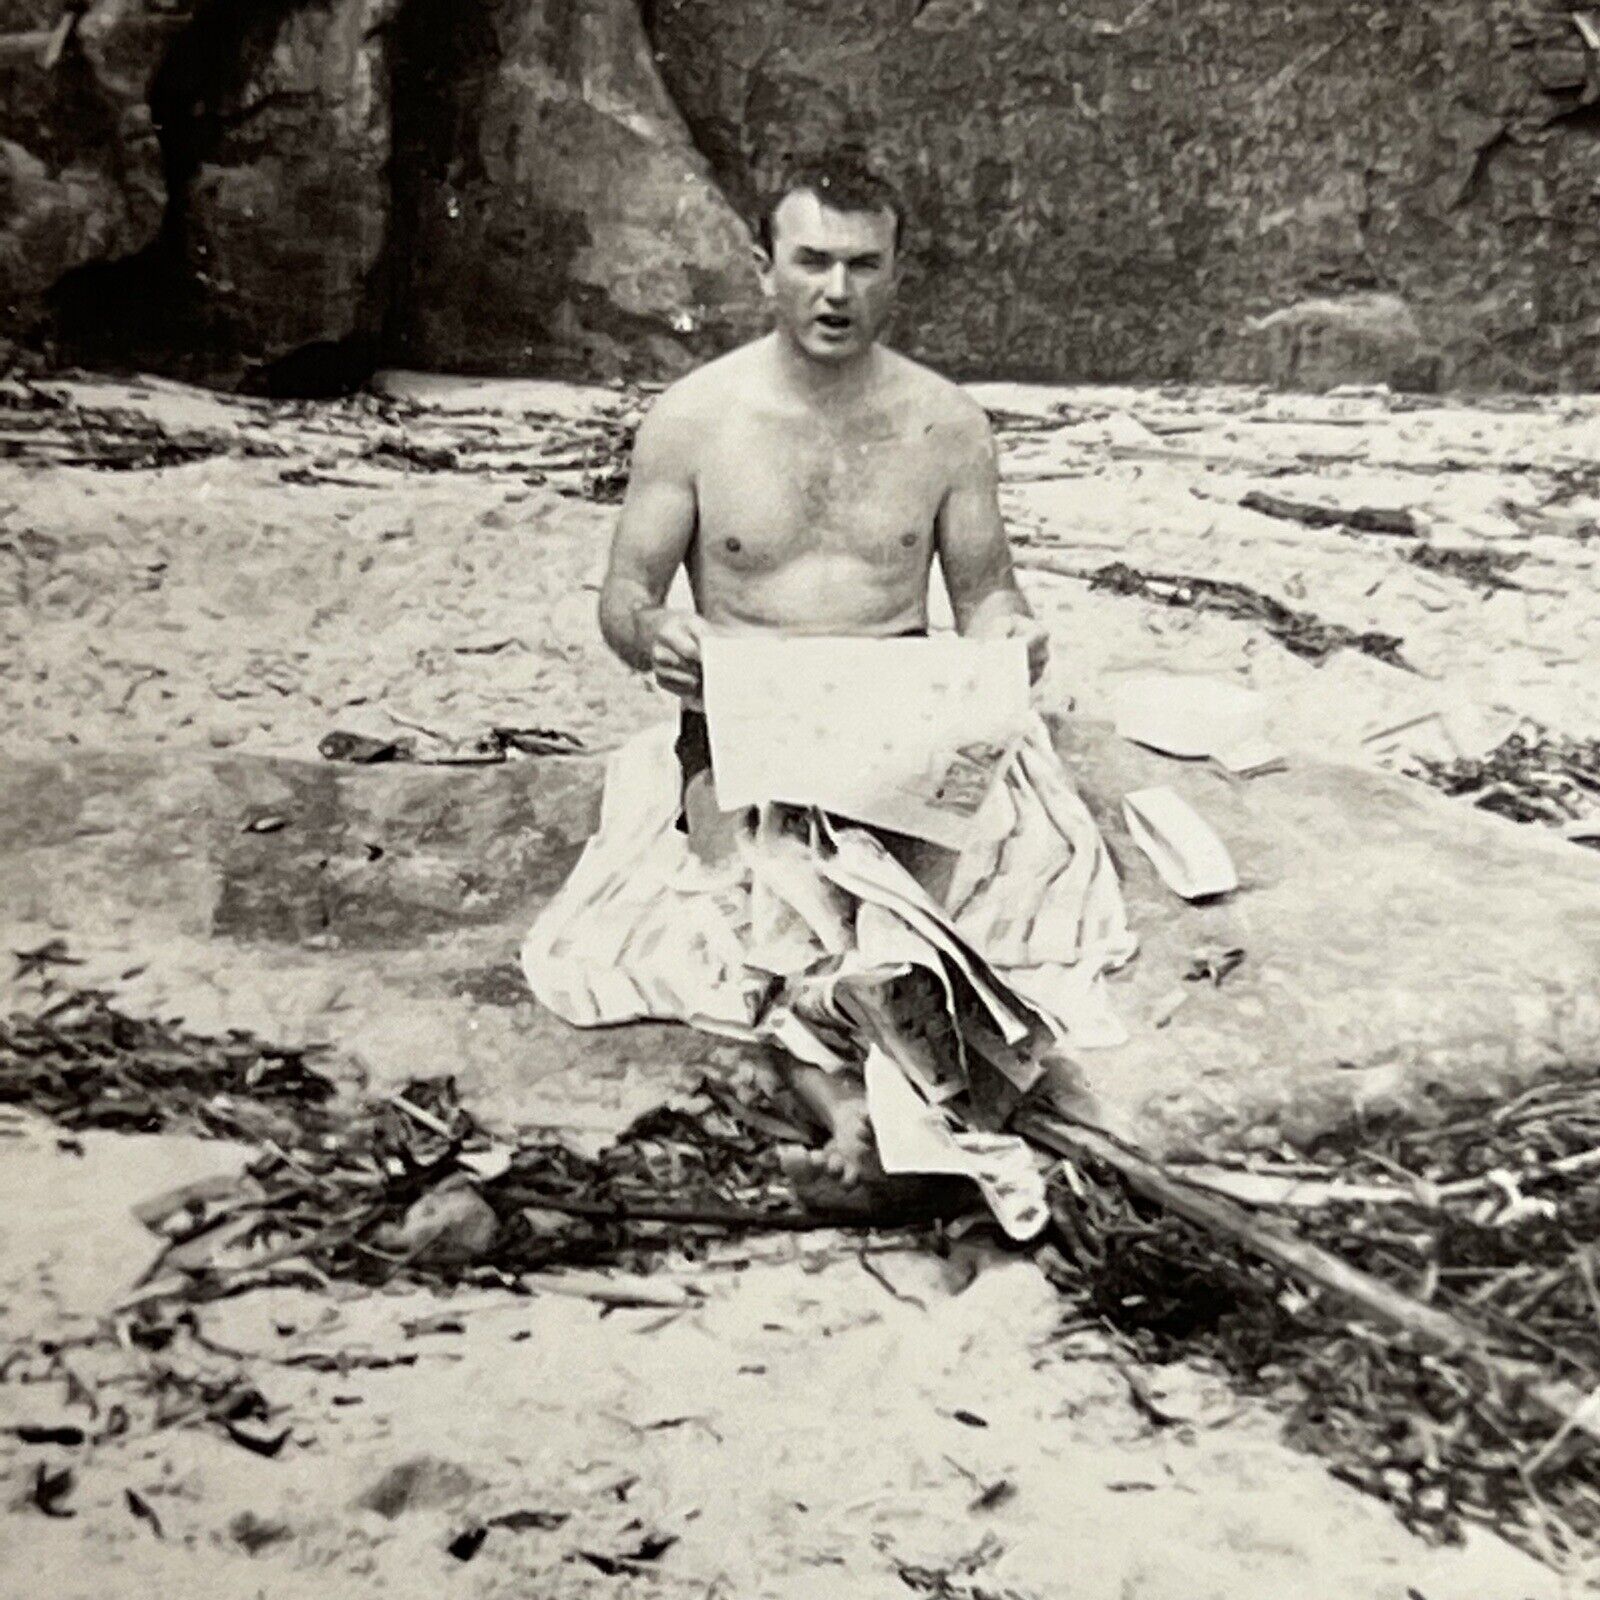 Vintage B&W Snapshot Photograph Handsome Man Bathing Suit Beach Reading Gay Int